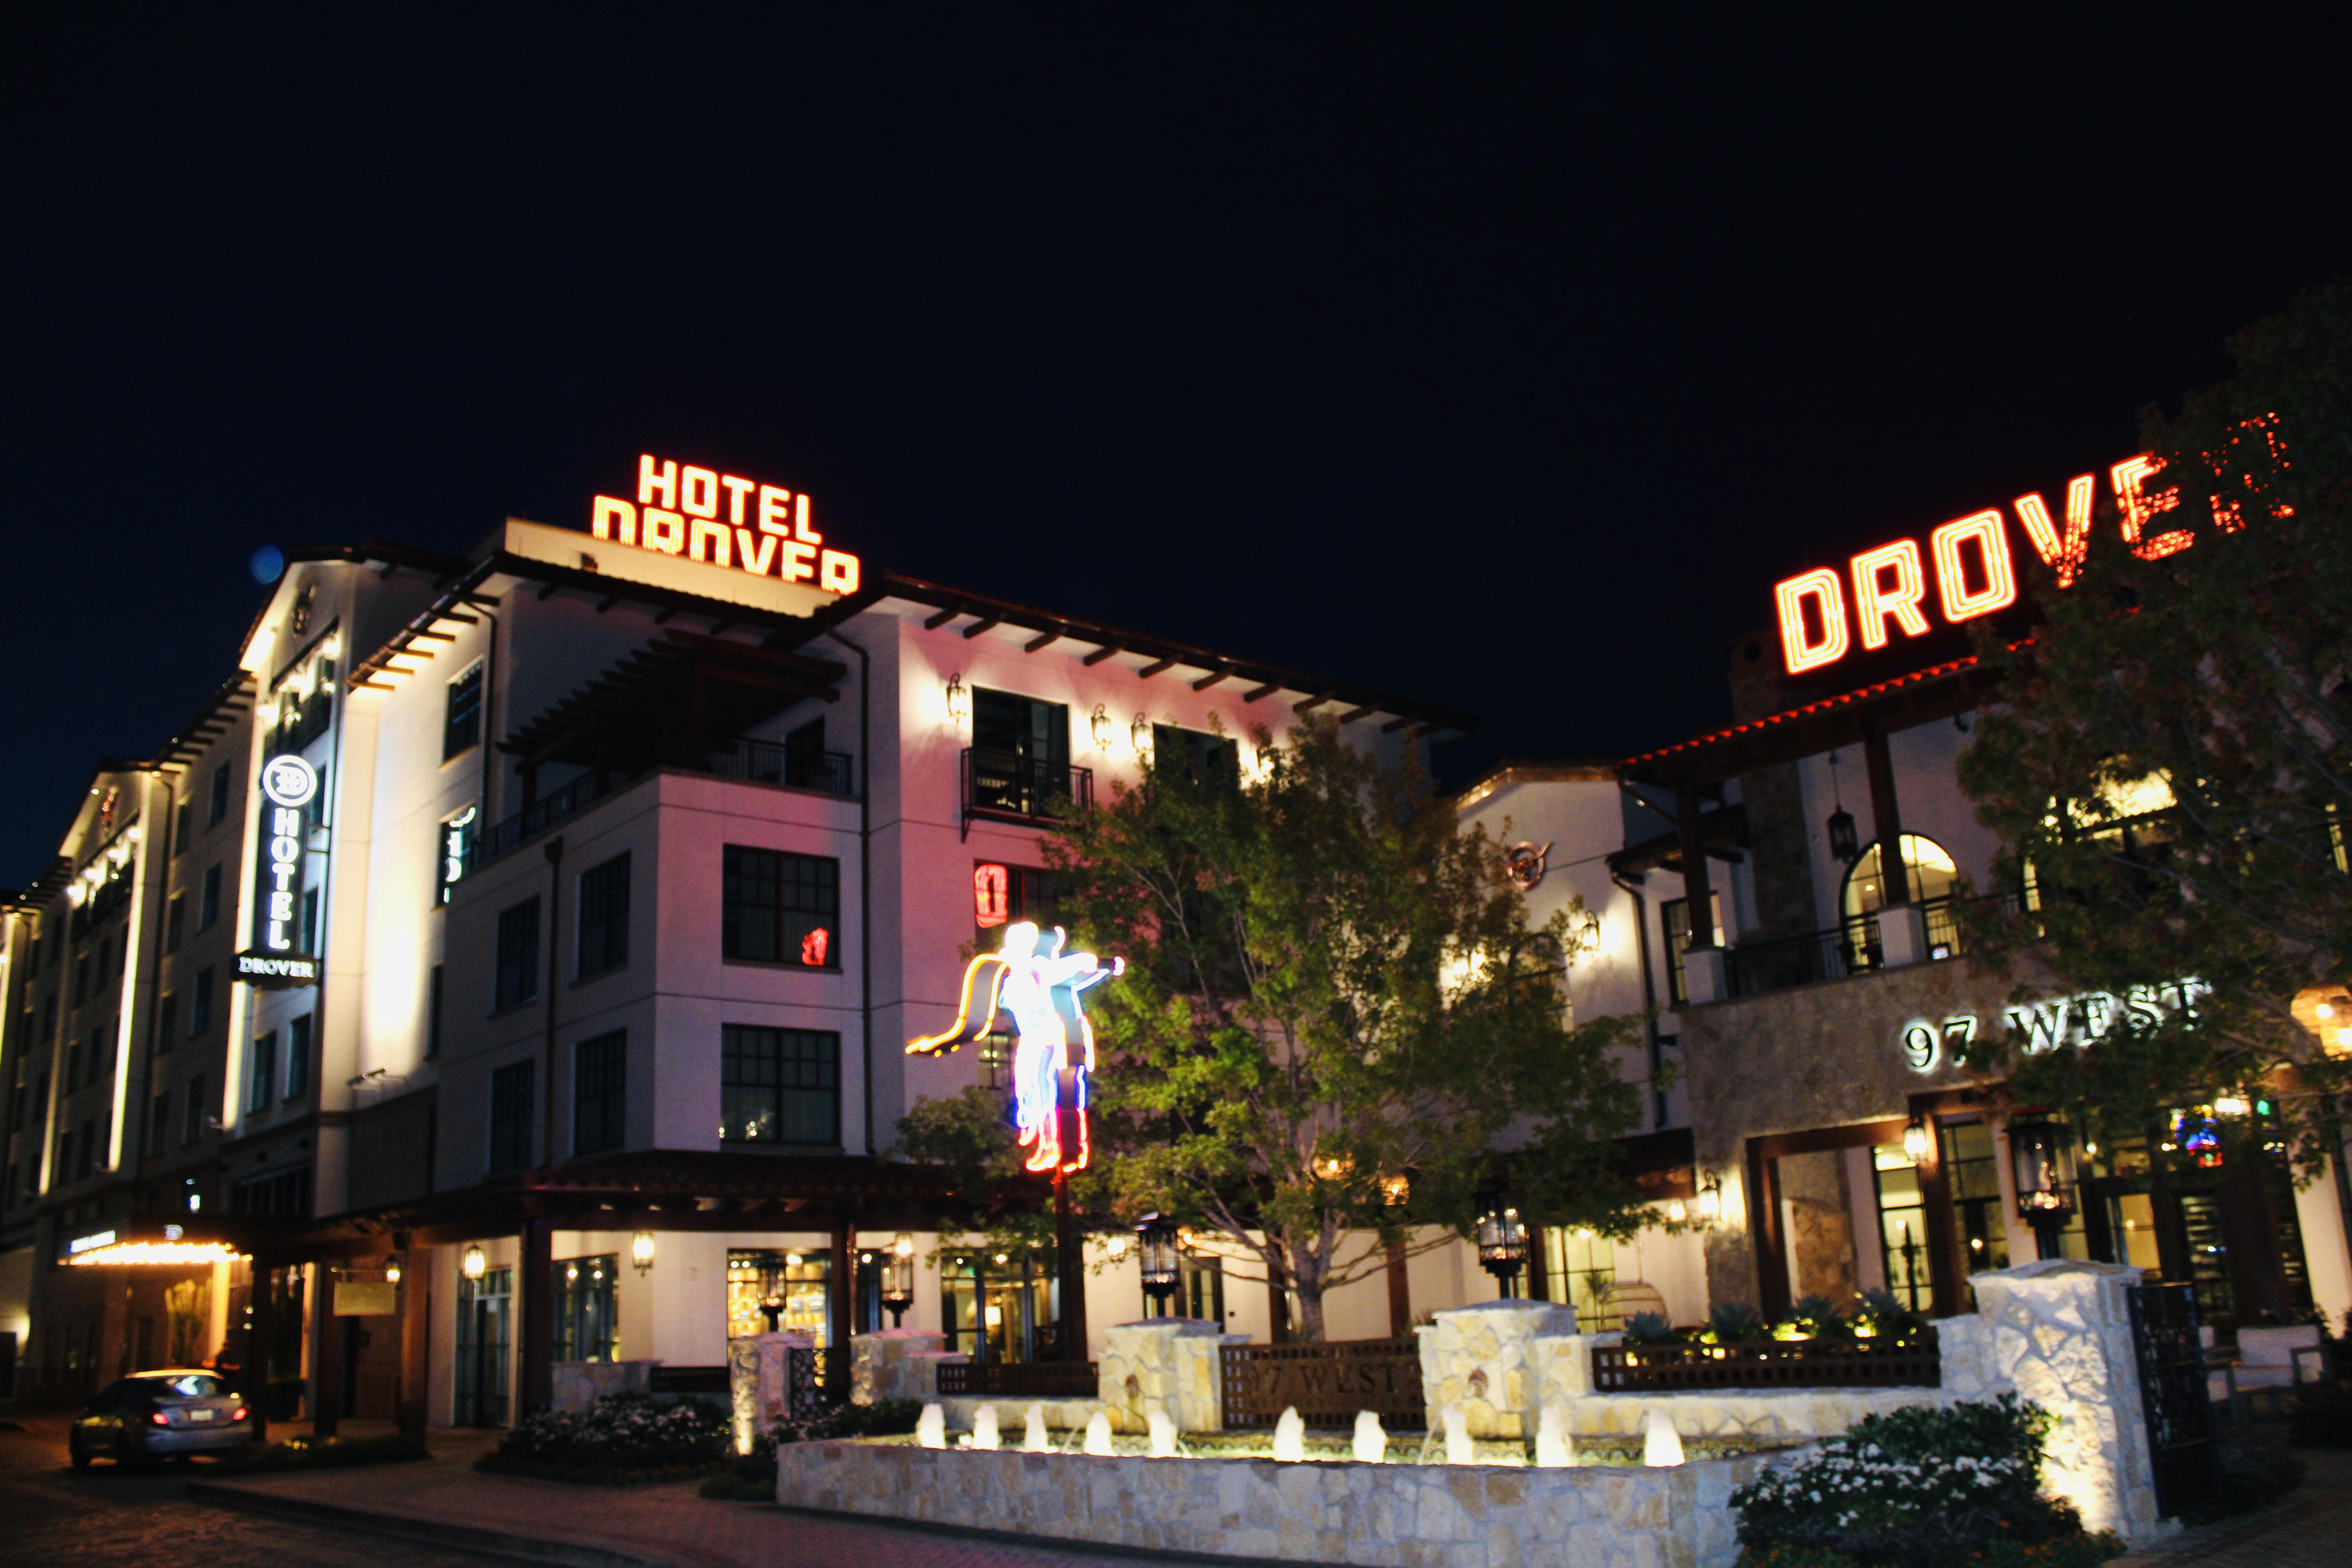 Fort Worth Drover Hotel in downtown Fort Worth, at night. The neon cowboy is awesome.